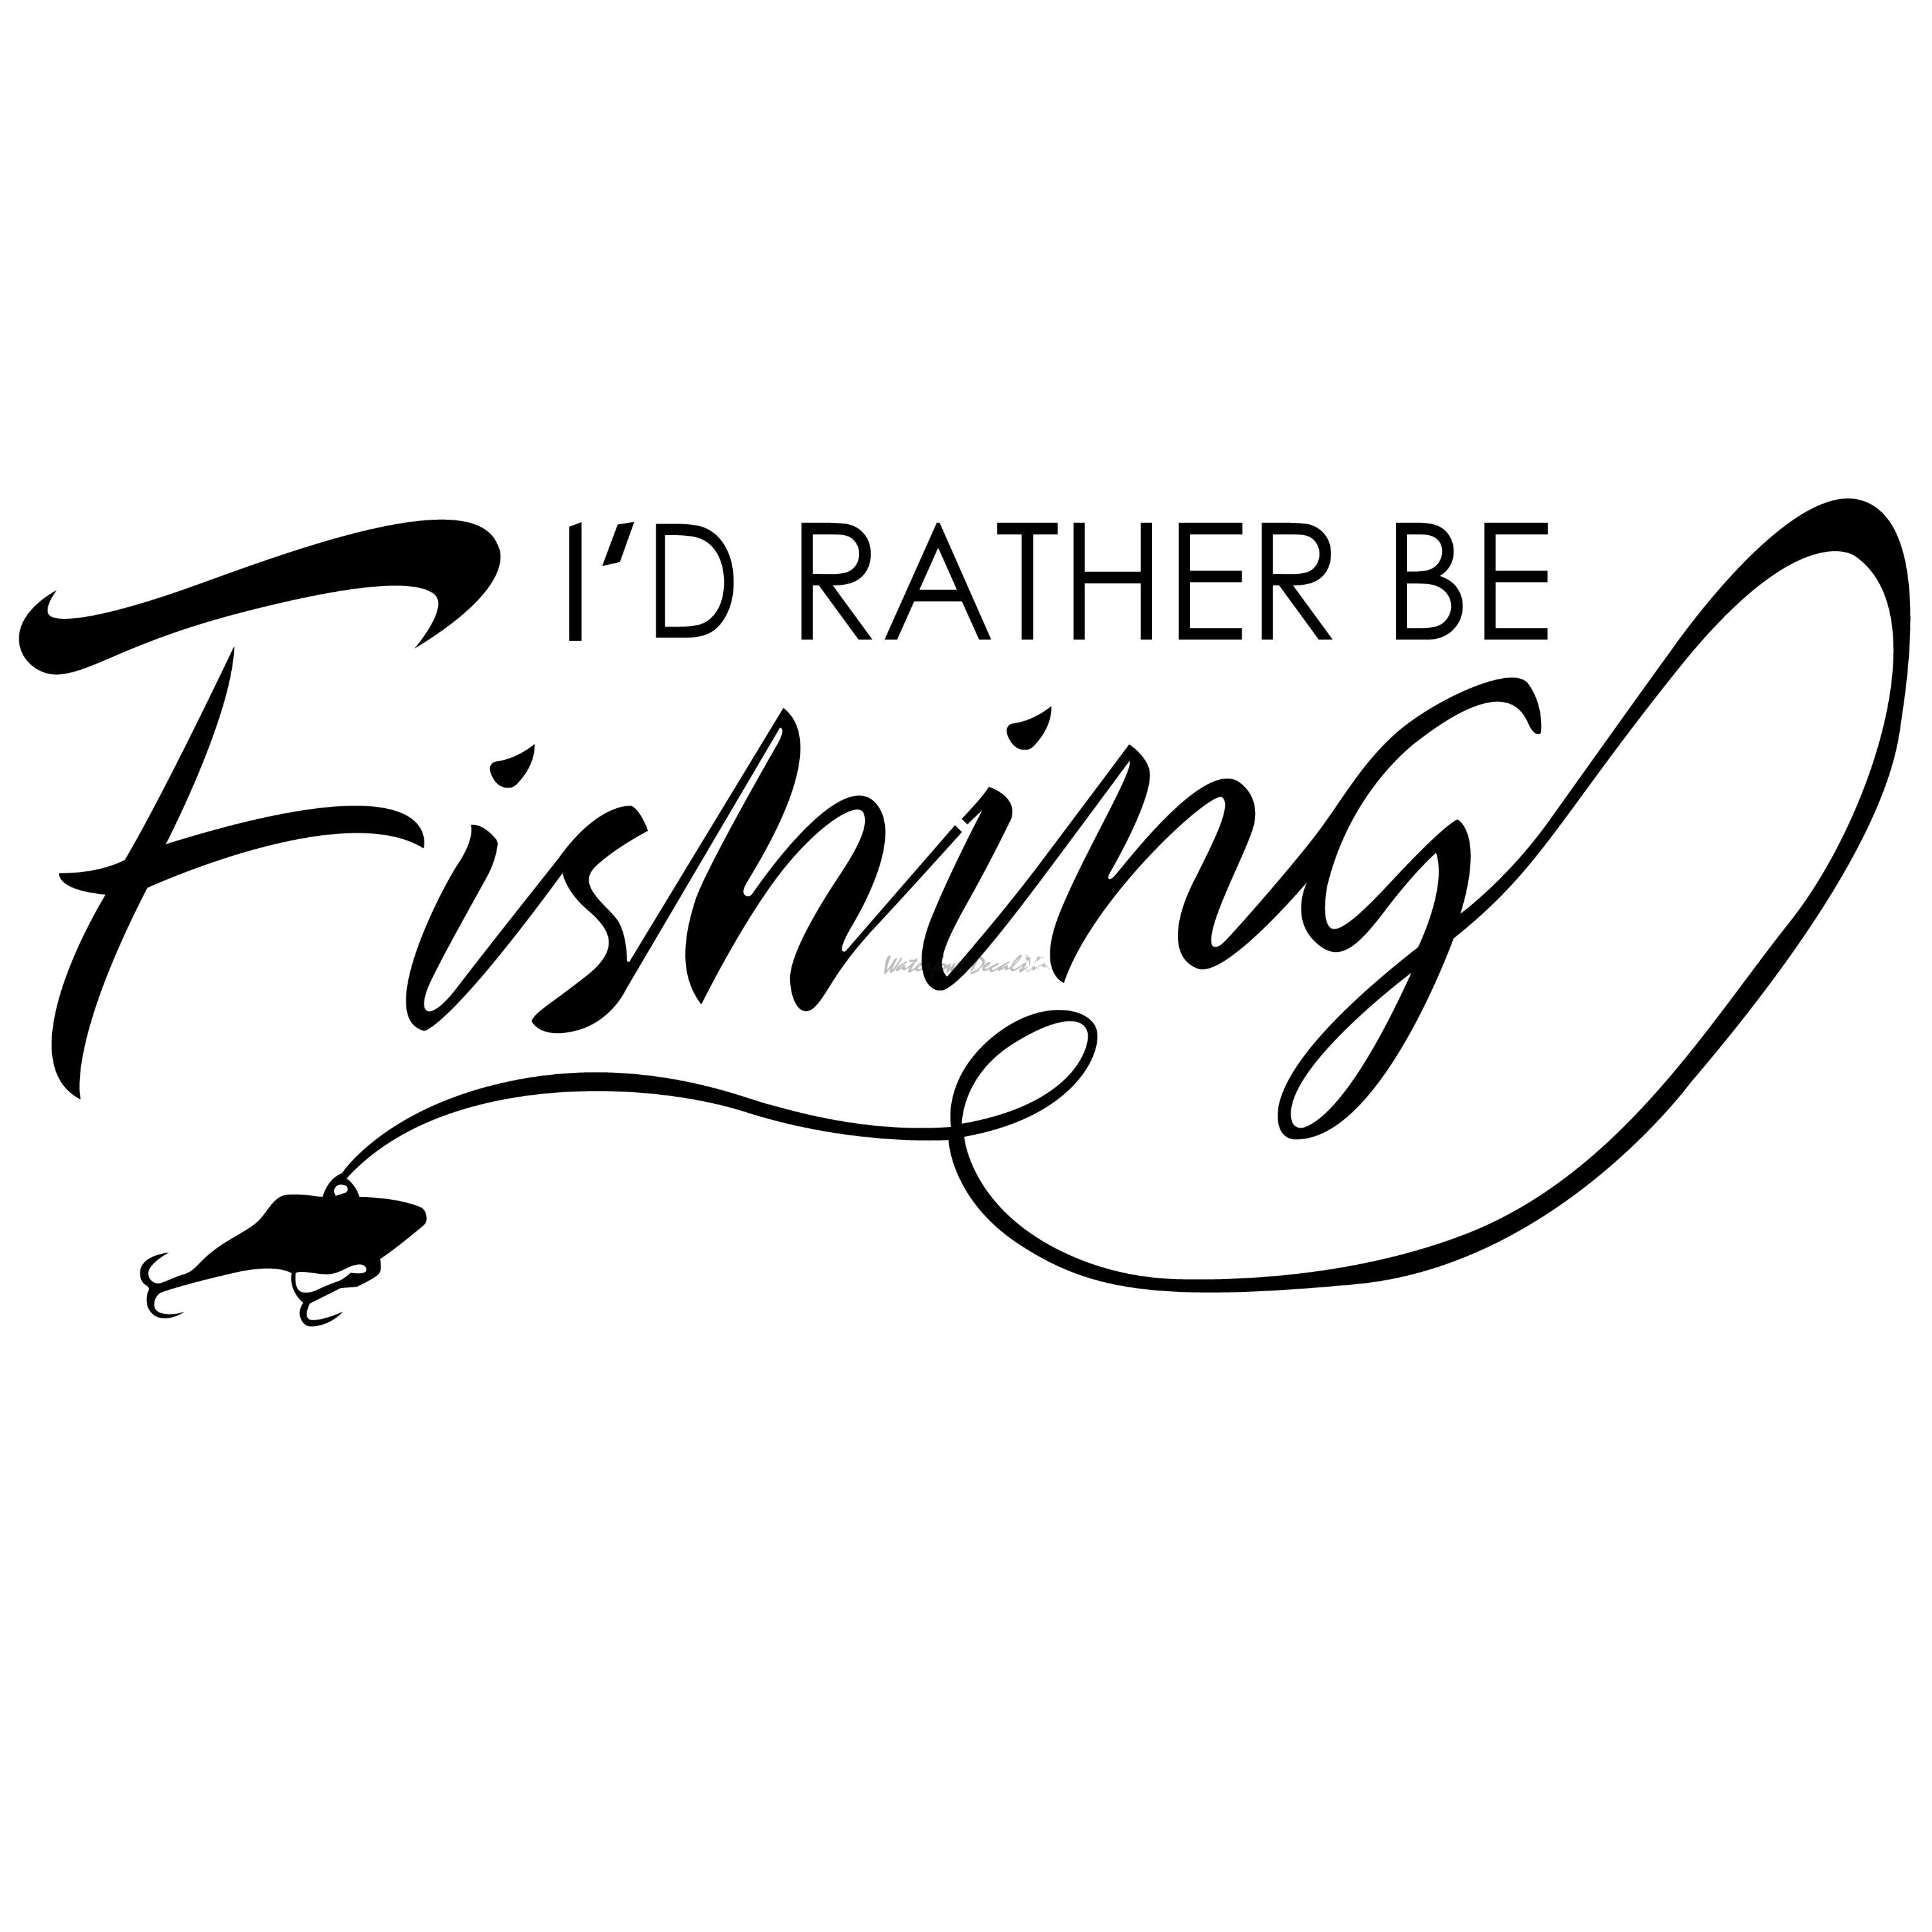 Download I'd Rather Be Fishing Decal - Fishing Sticker - 1252 ...